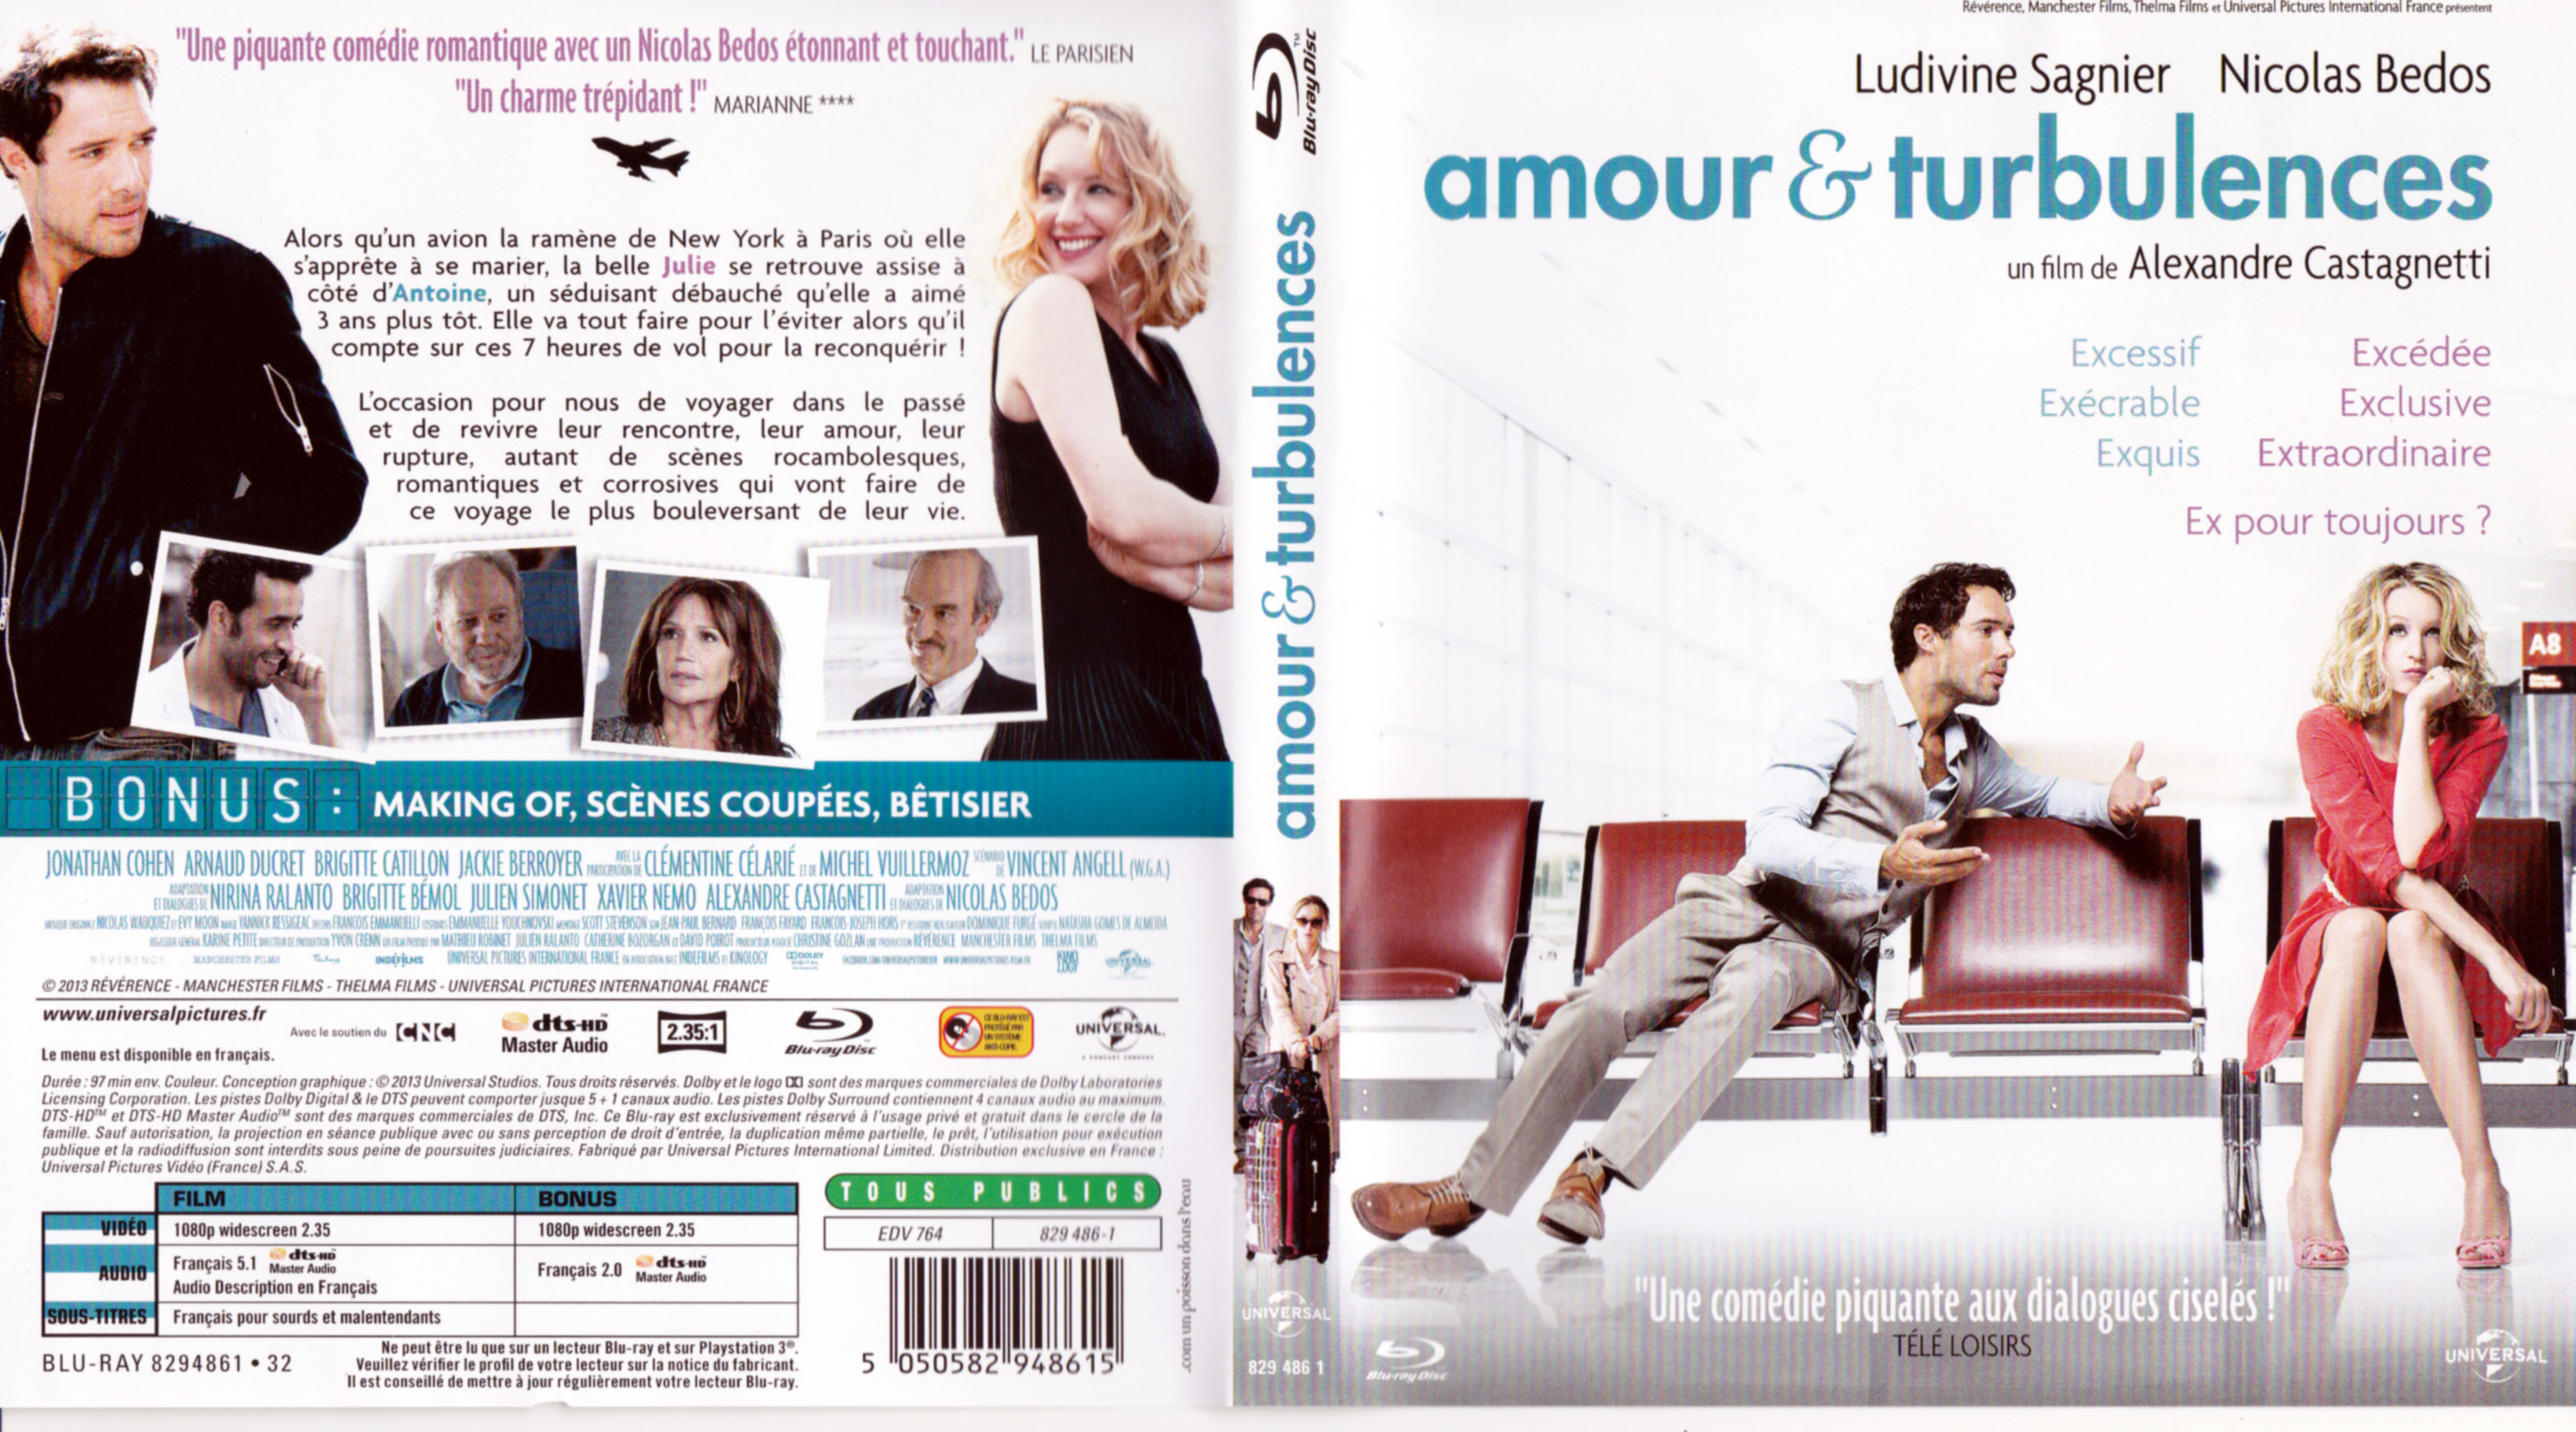 Jaquette DVD Amour & Turbulences (BLU-RAY)